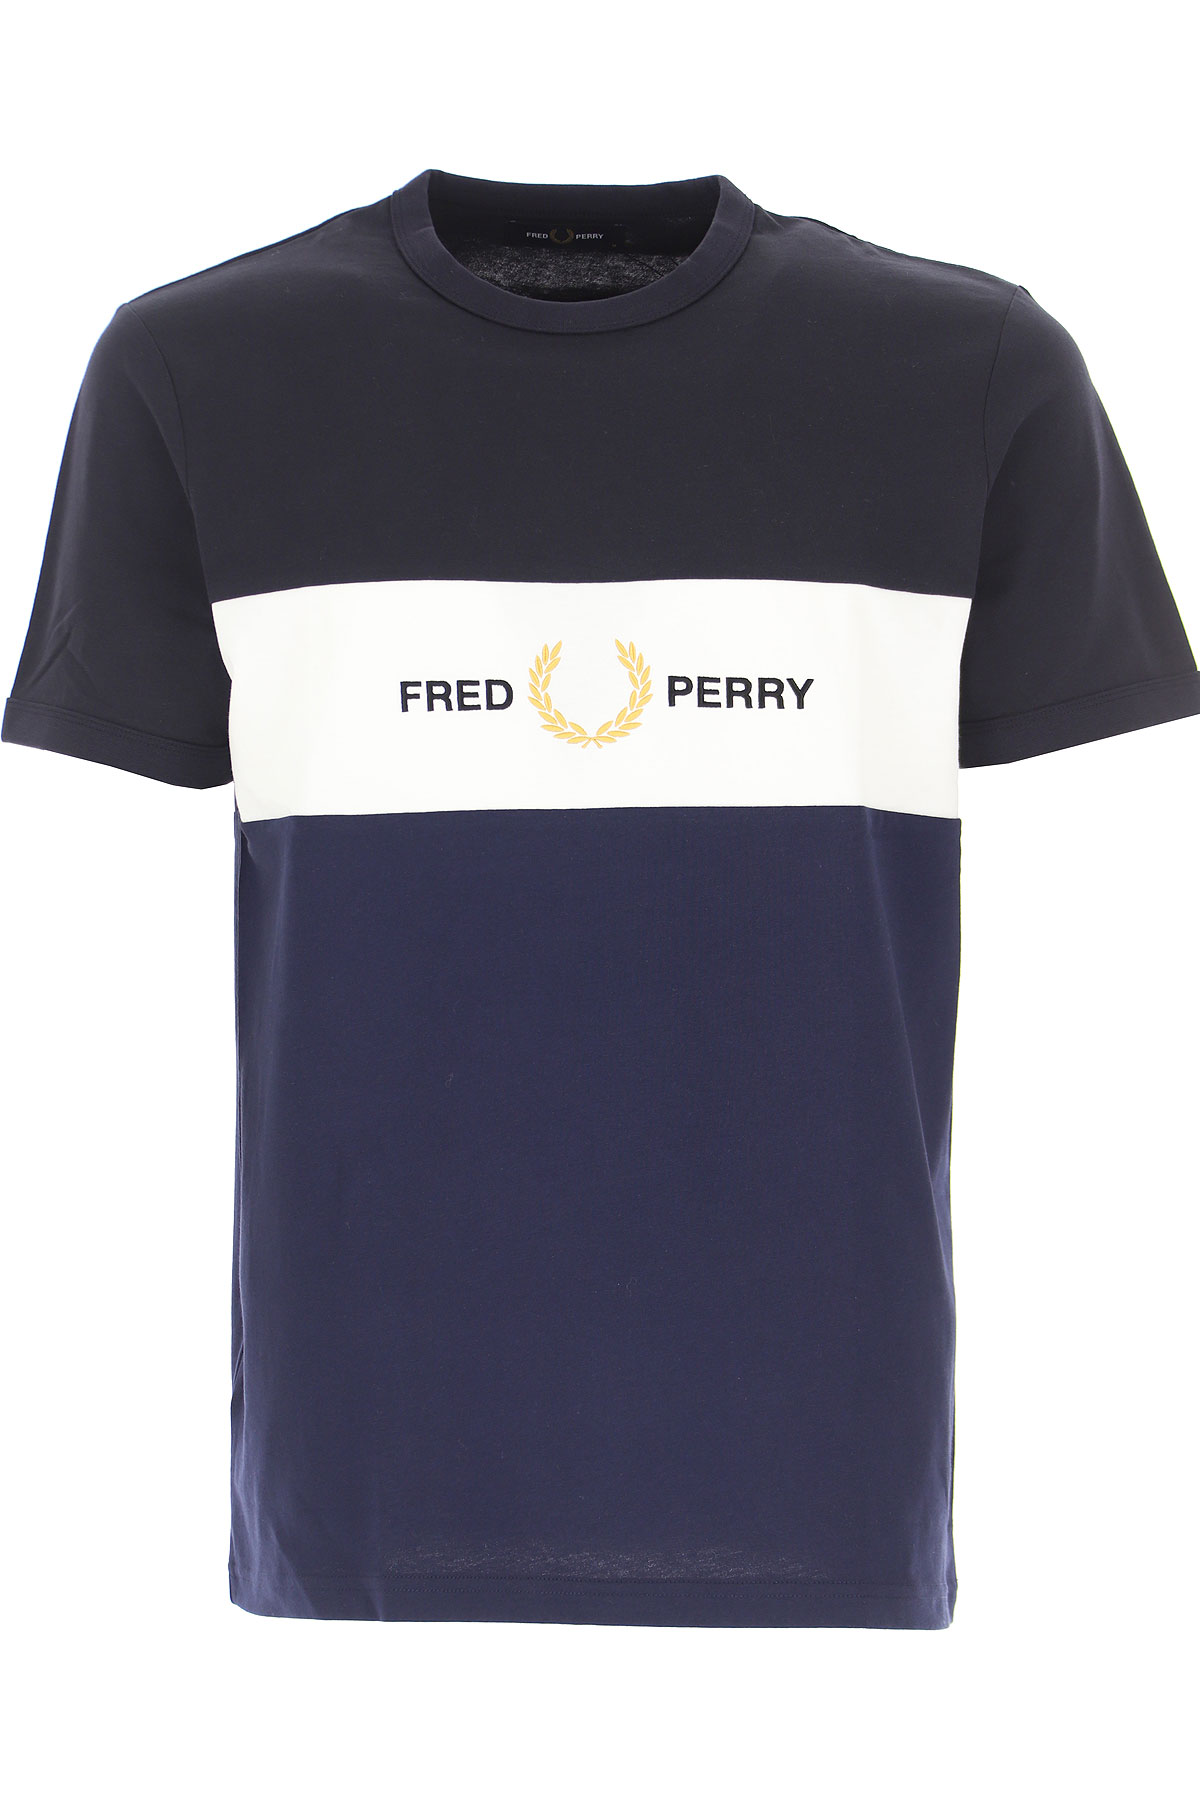 Fred Perry T-Shirt for Men, Dark Blue, Cotton, 2021, L M | AccuWeather Shop